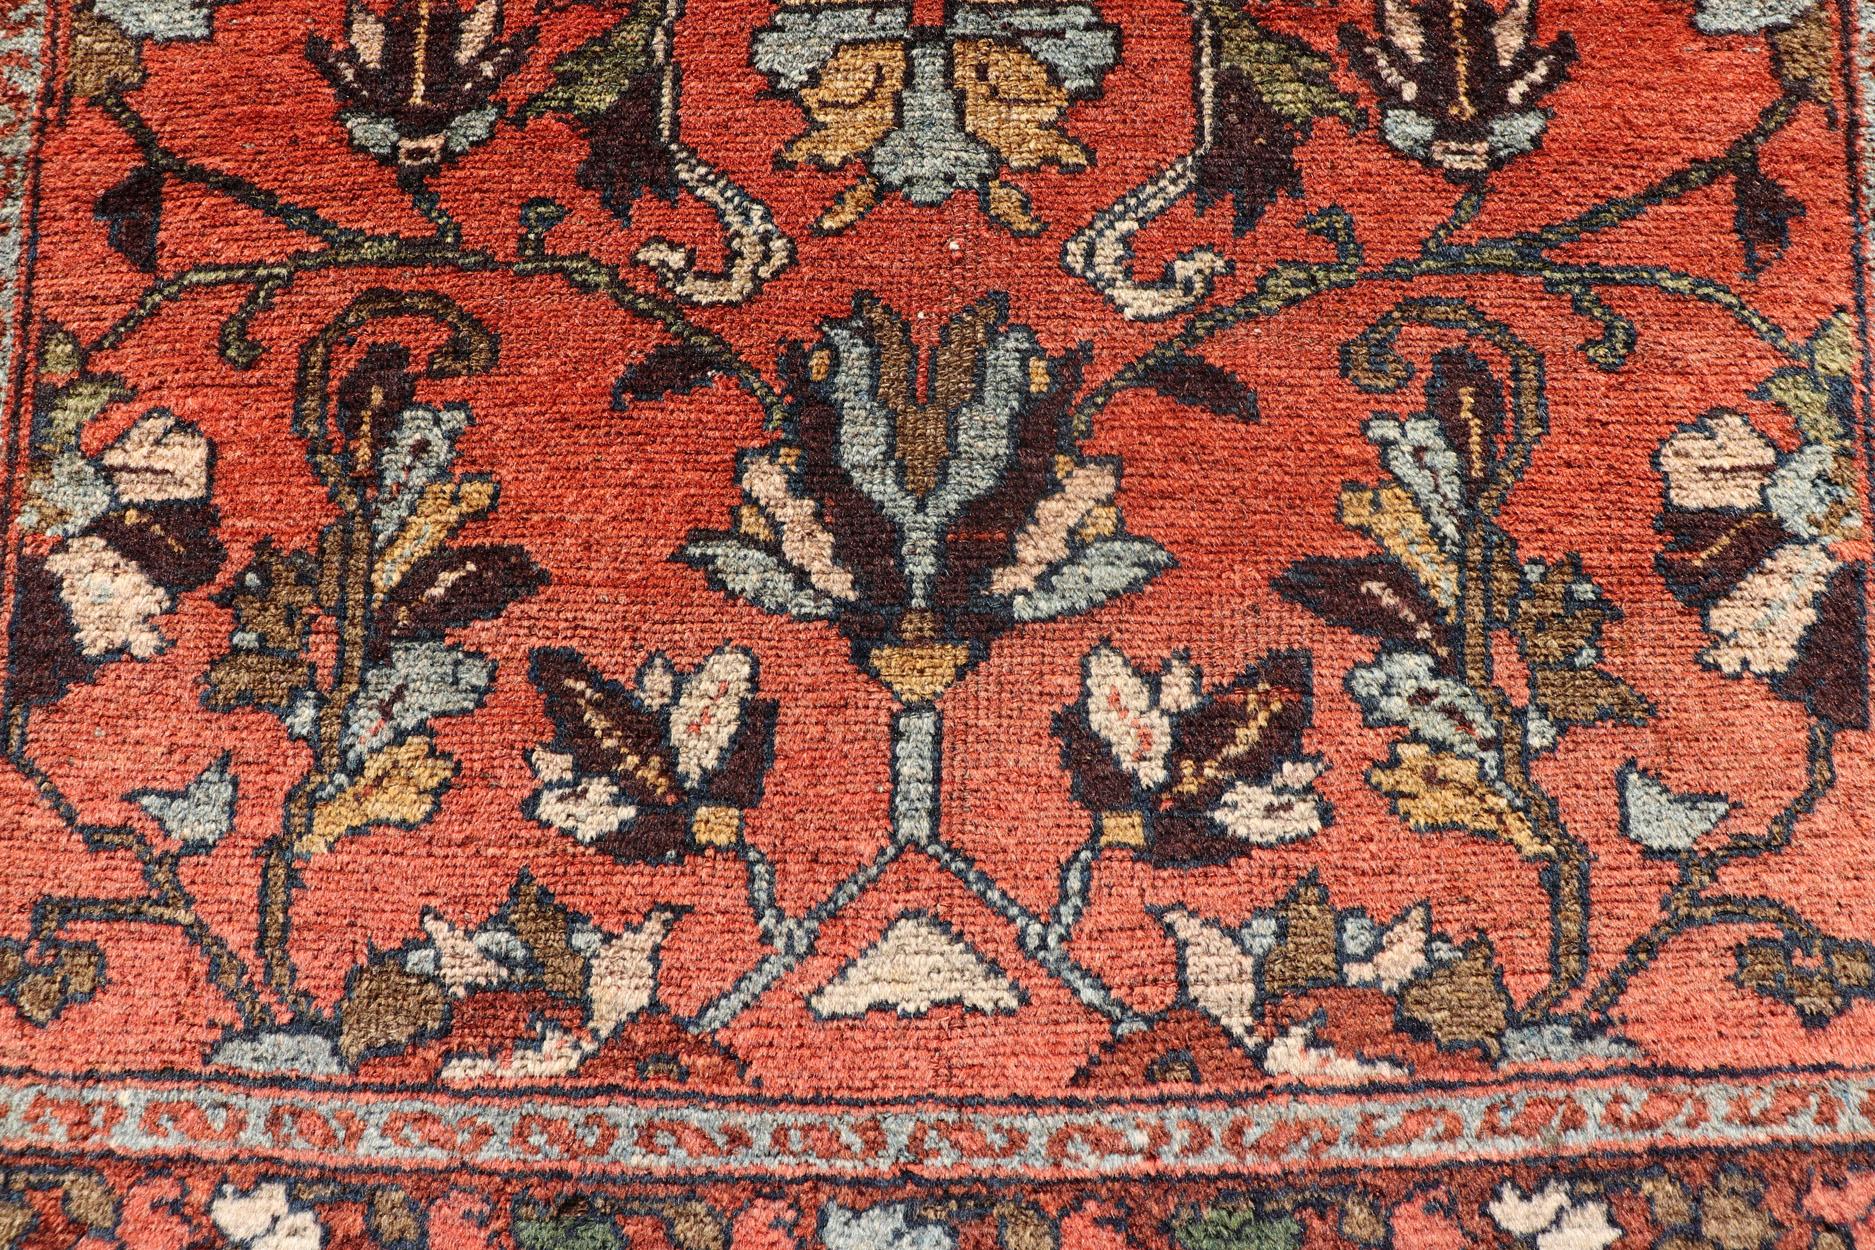 Antique Persian Hamadan Carpet with Floral Designs in Soft Orange Red and Brown For Sale 3